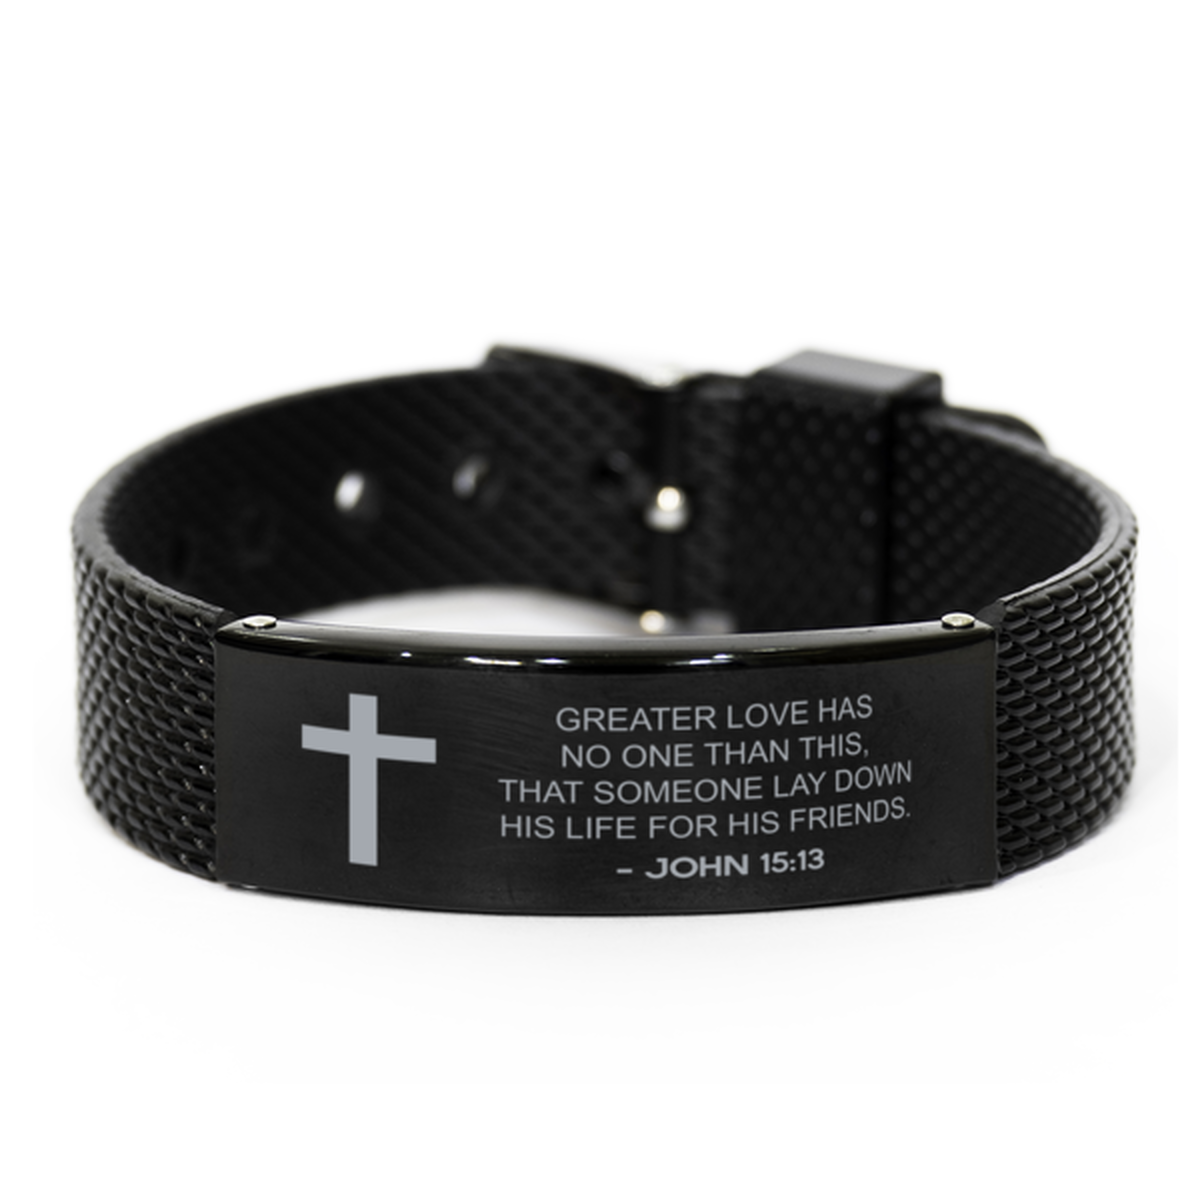 Christian Black Bracelet,, John 15:13 Greater Love Has No One Than This, That Someone, Motivational Bible Verse Gifts For Men Women